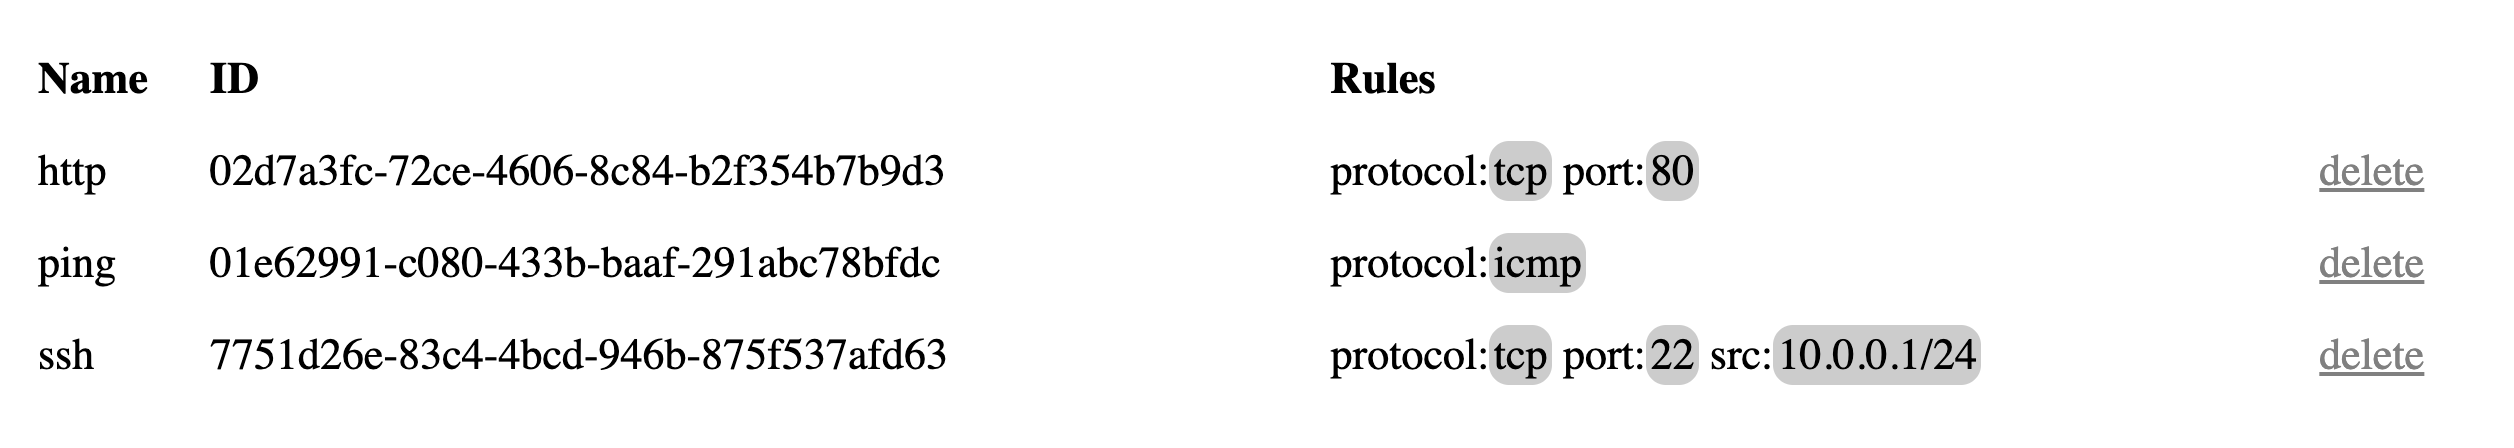 A listing of firewall rules